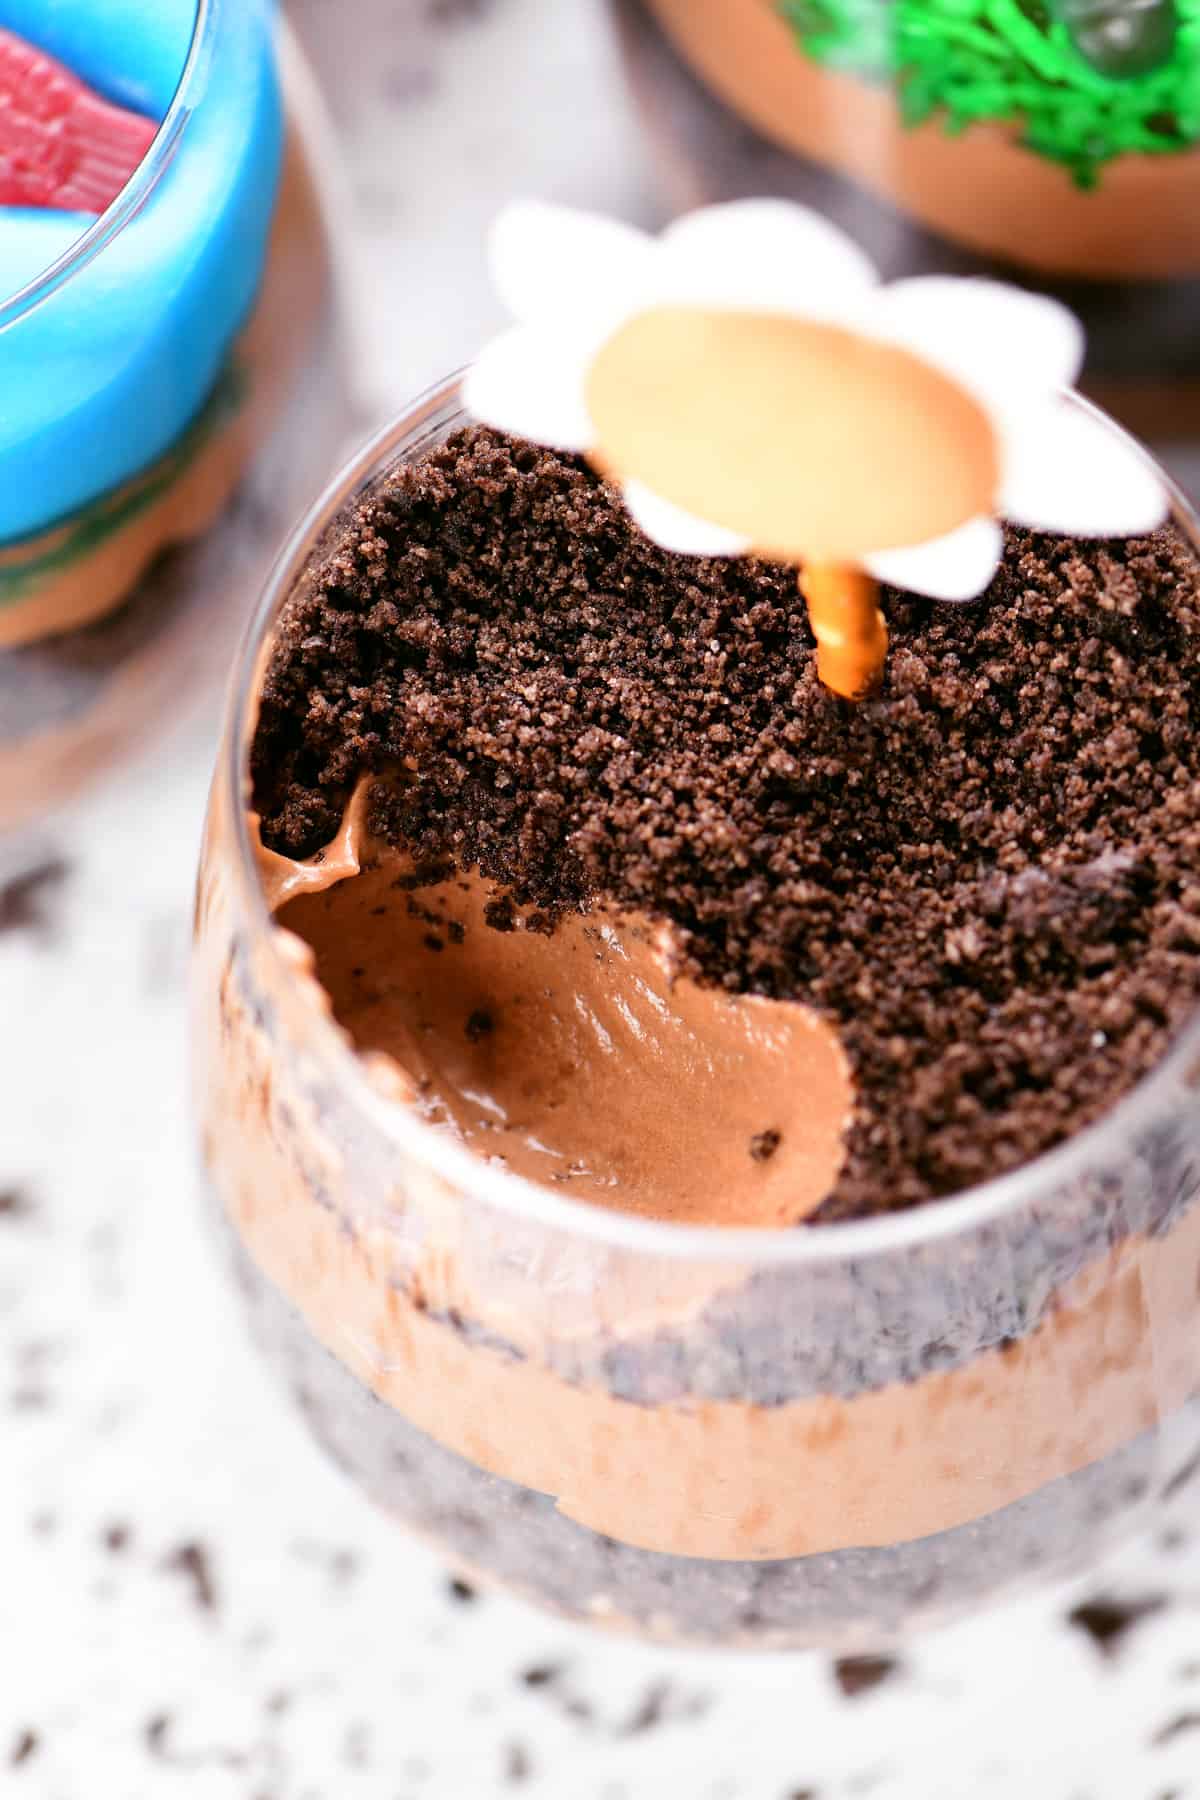 Smooth chocolate pudding topped with crushed Oreos dirt cake in cups.